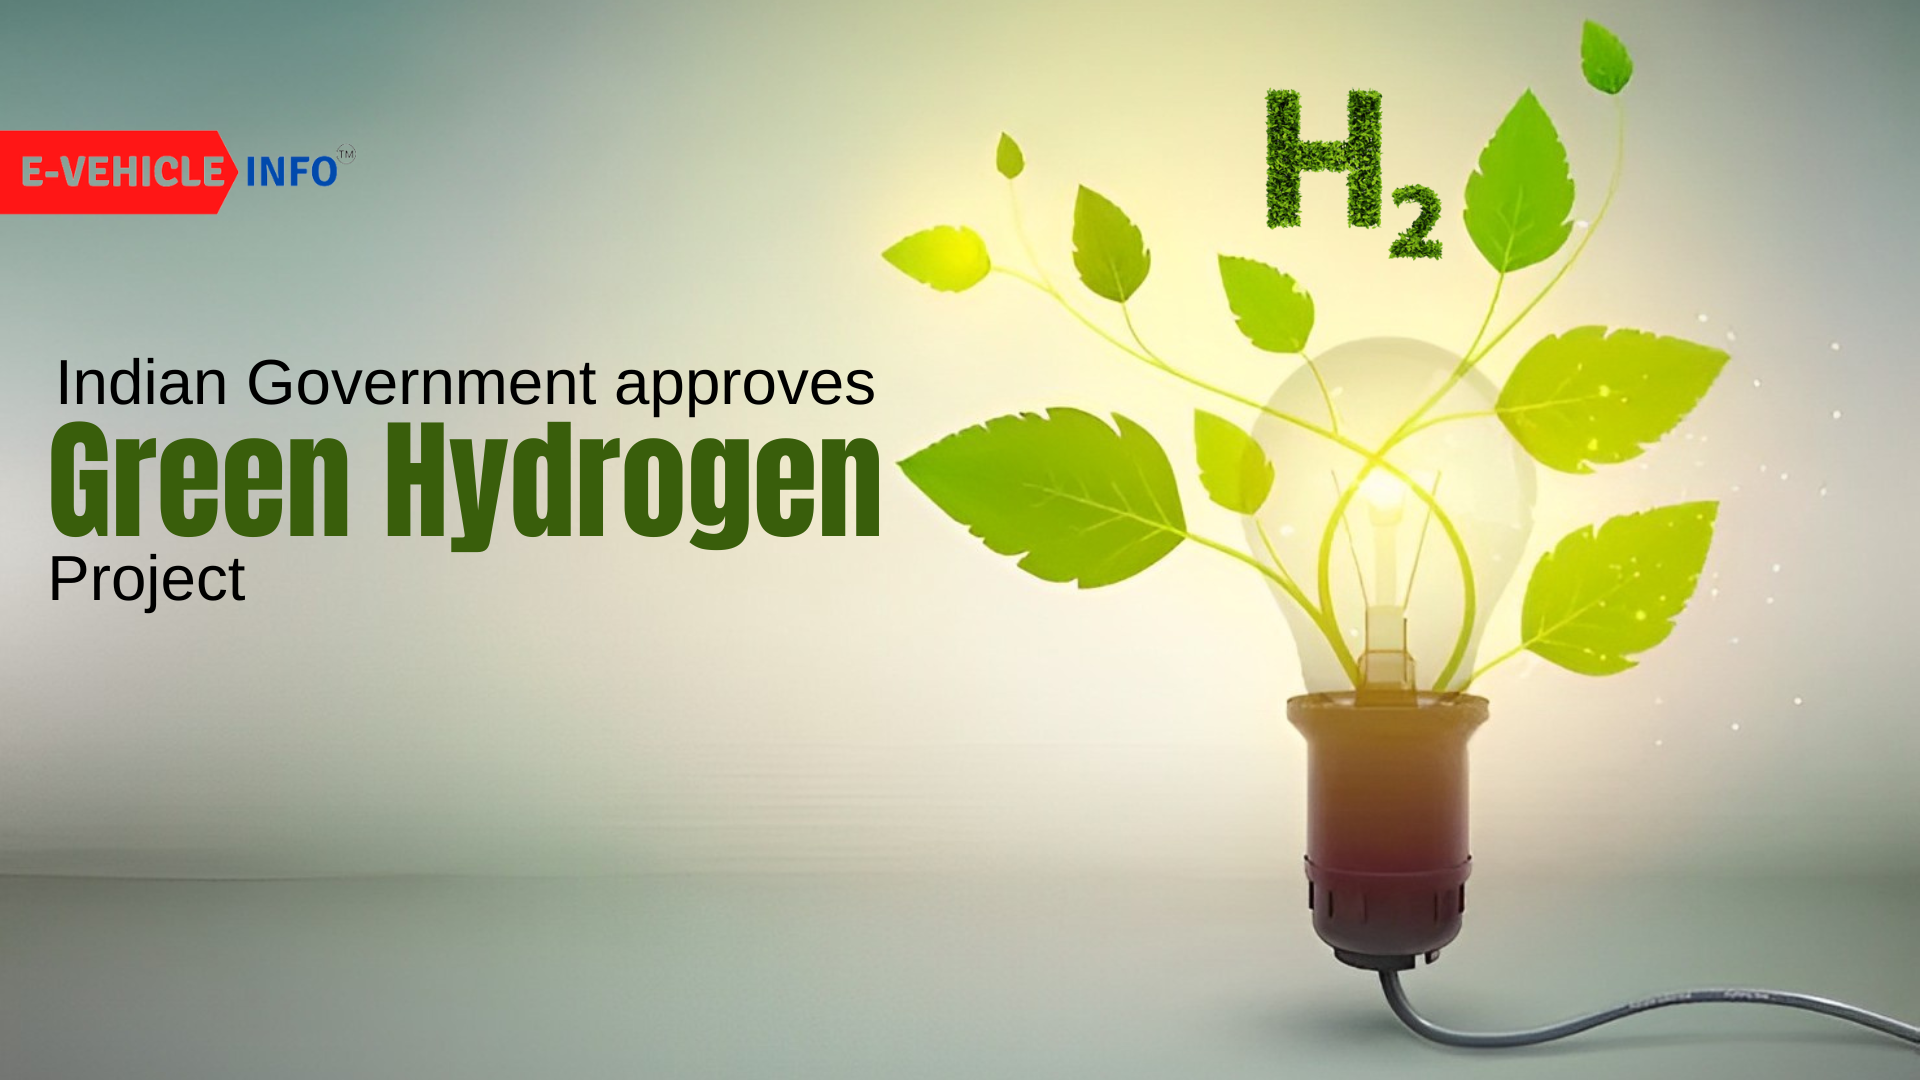 Indian government approves a 190 billion Green Hydrogen Project